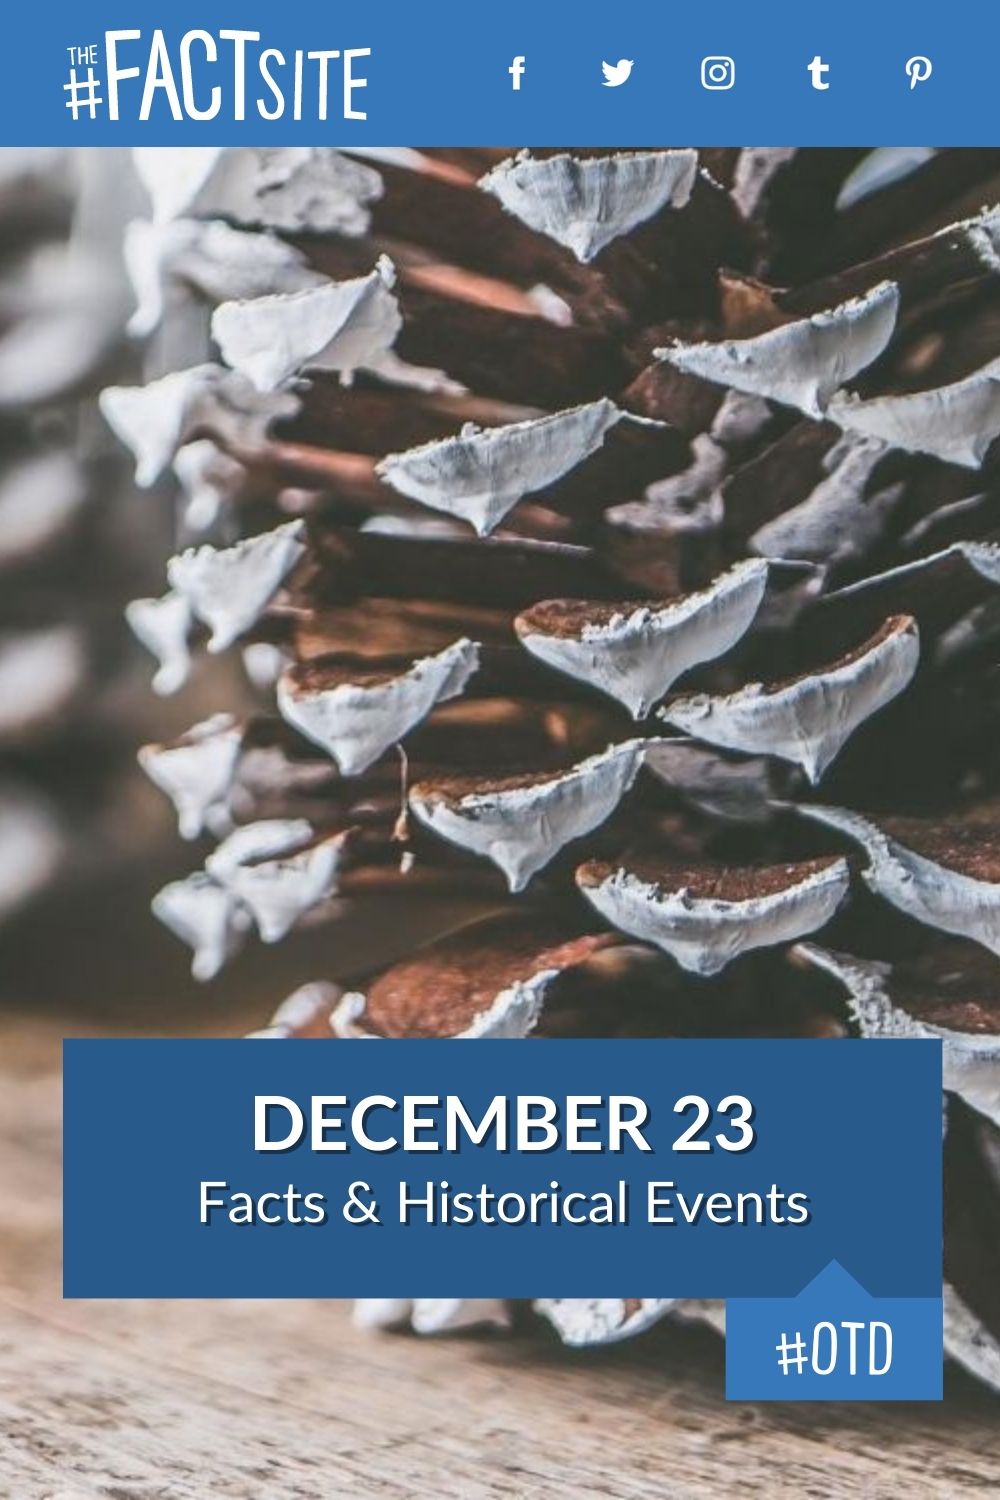 Facts & Historic Events That Happened on December 23